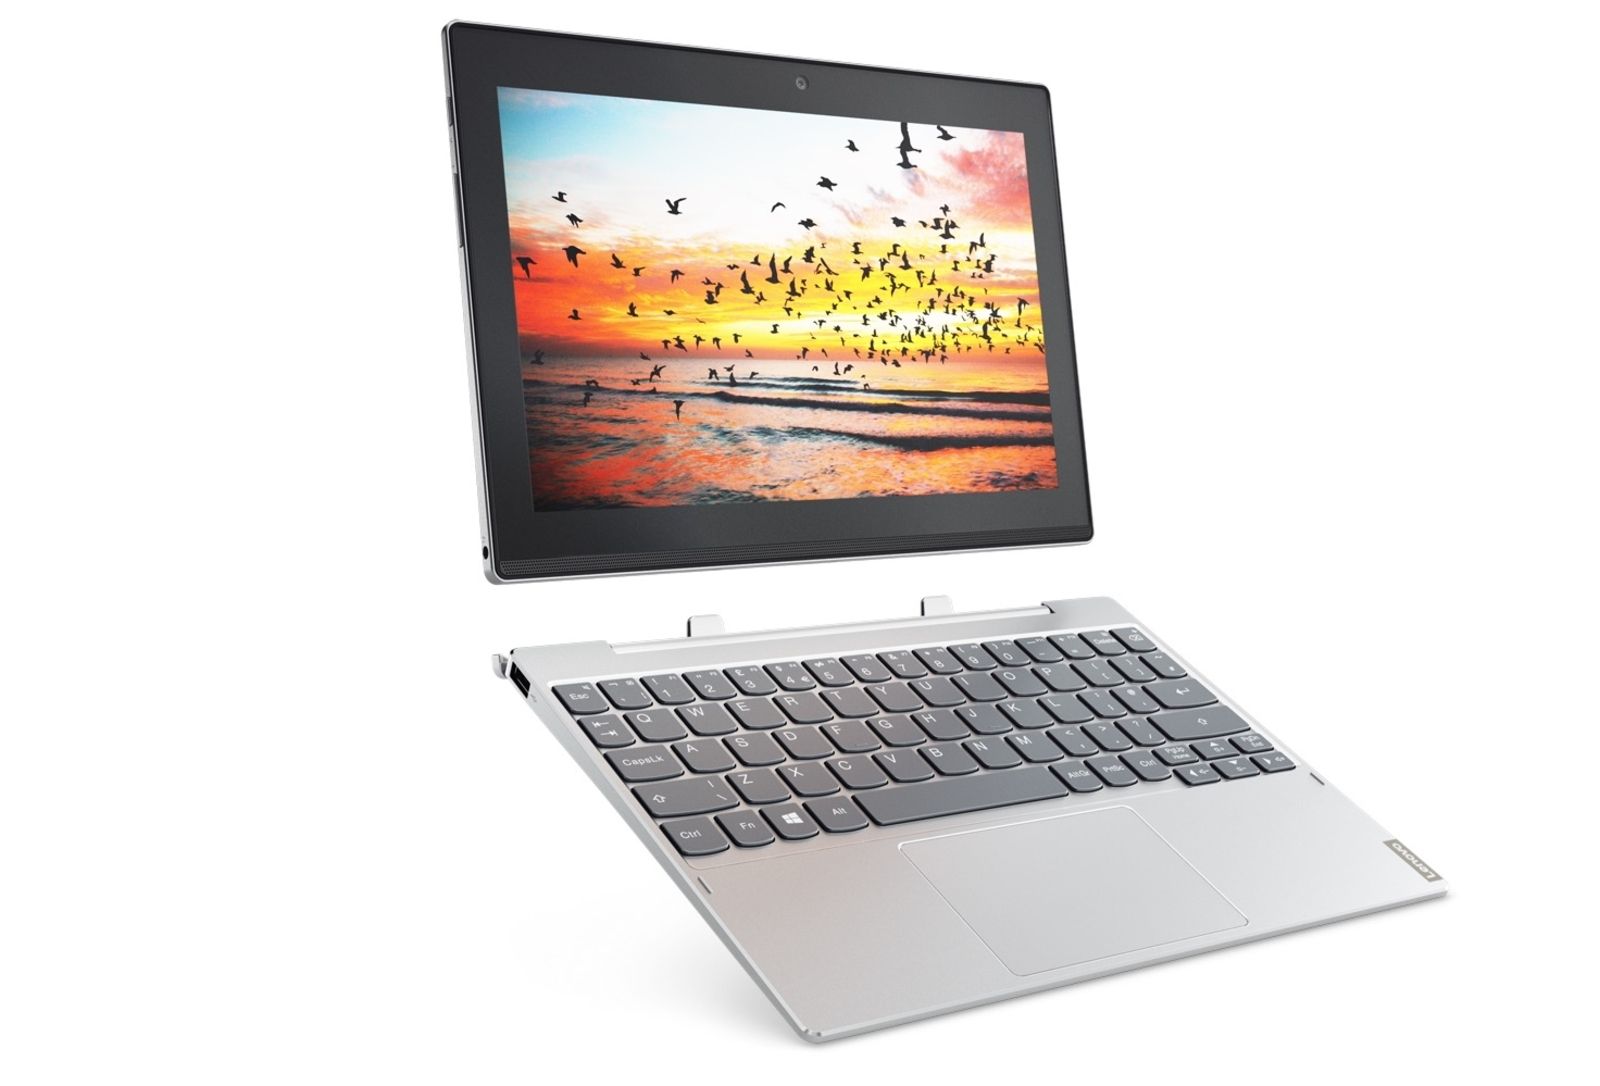 lenovo miix 320 is an entry level portable 2 in 1 image 1